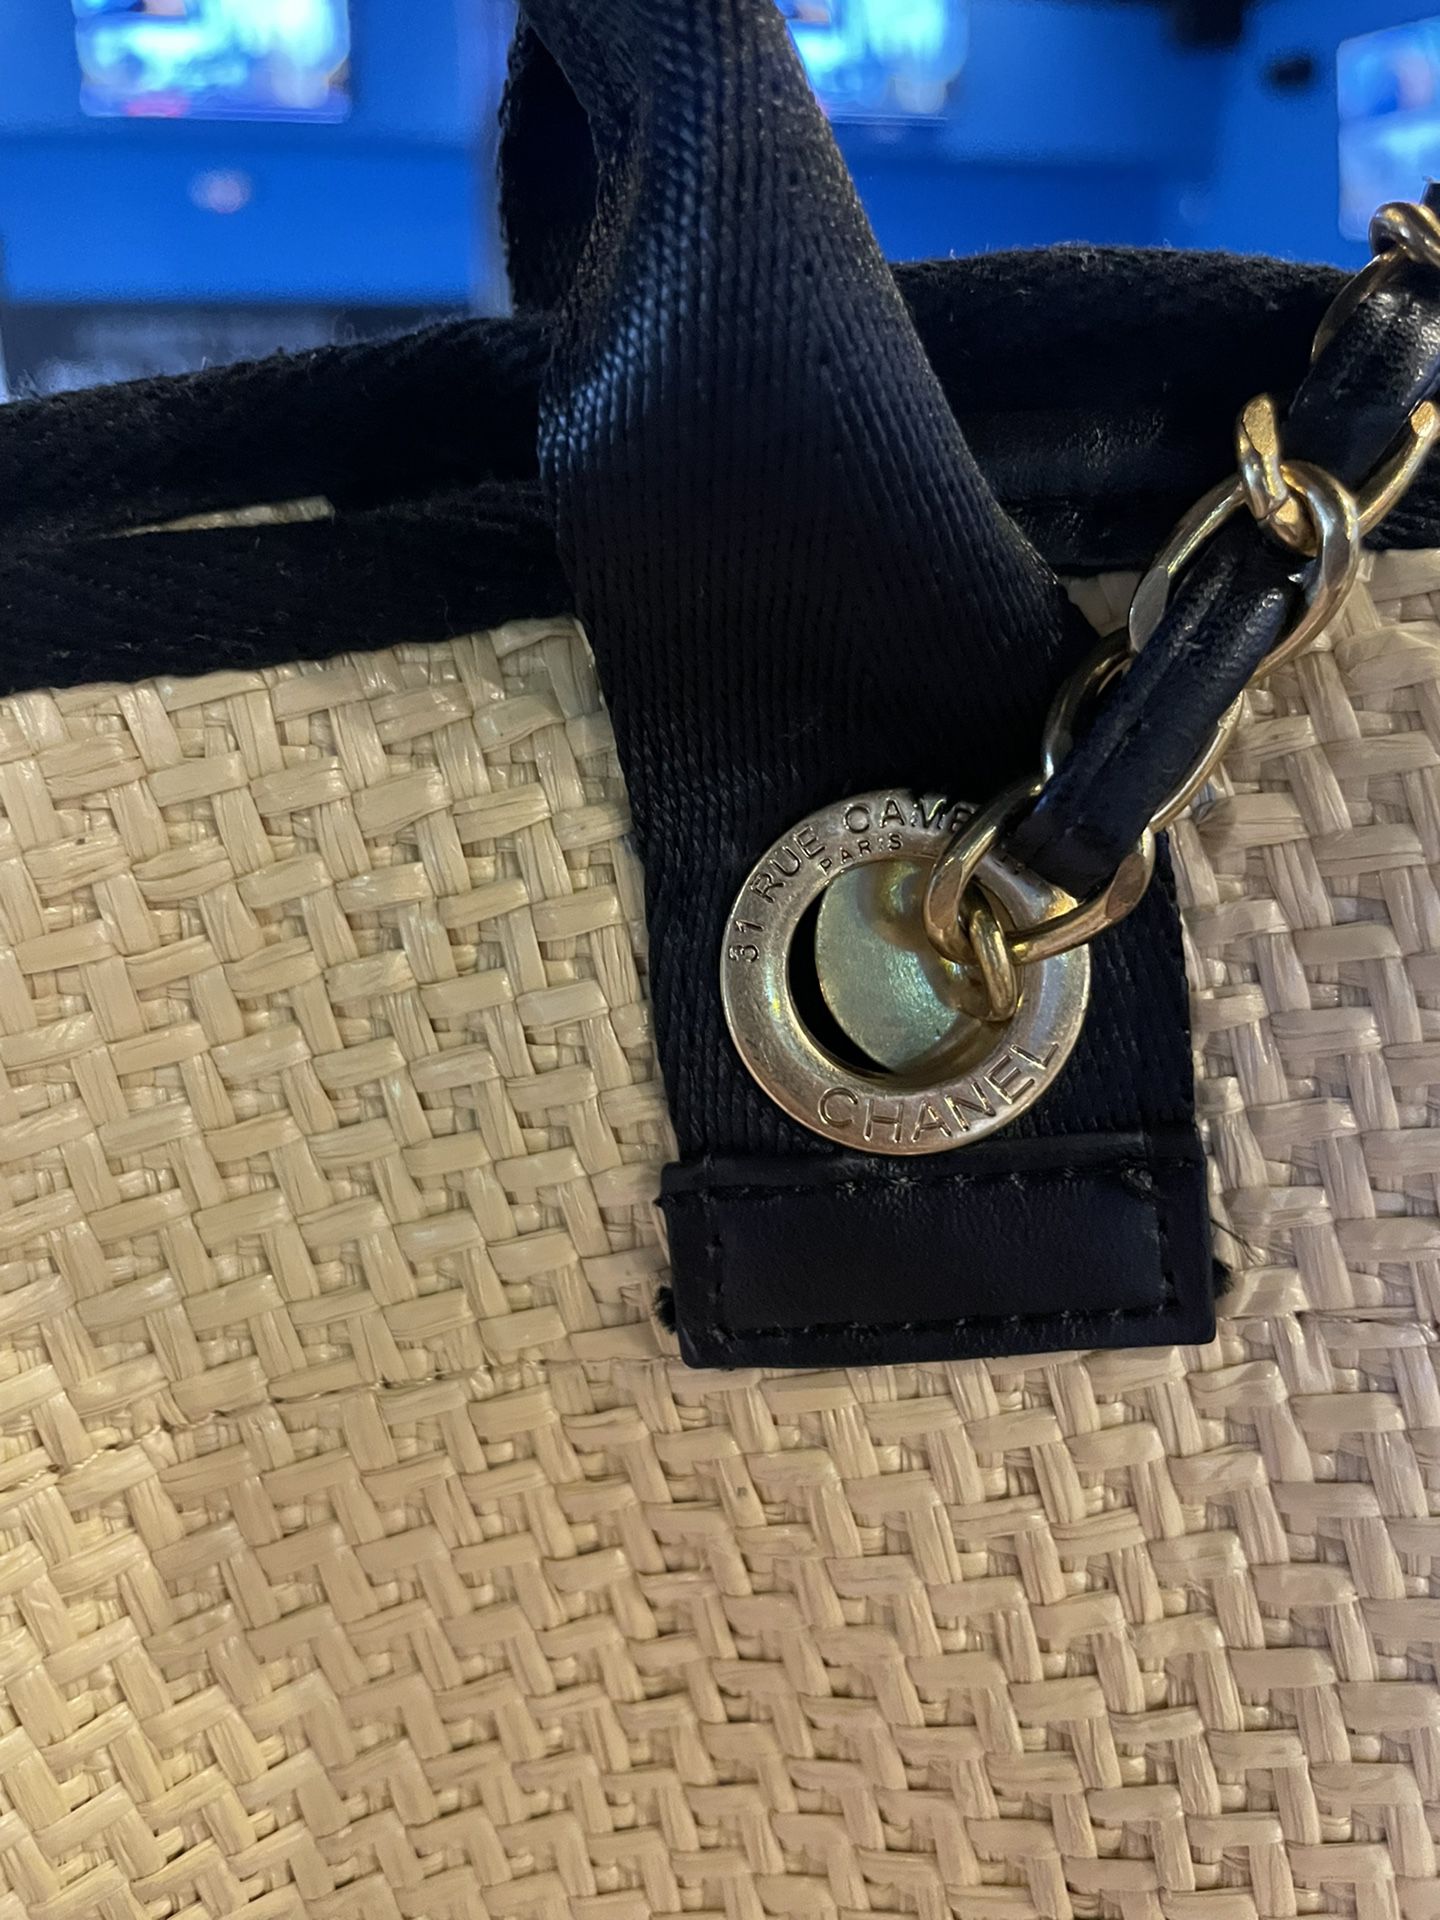 Chanel Straw Tote for Sale in Houston, TX - OfferUp